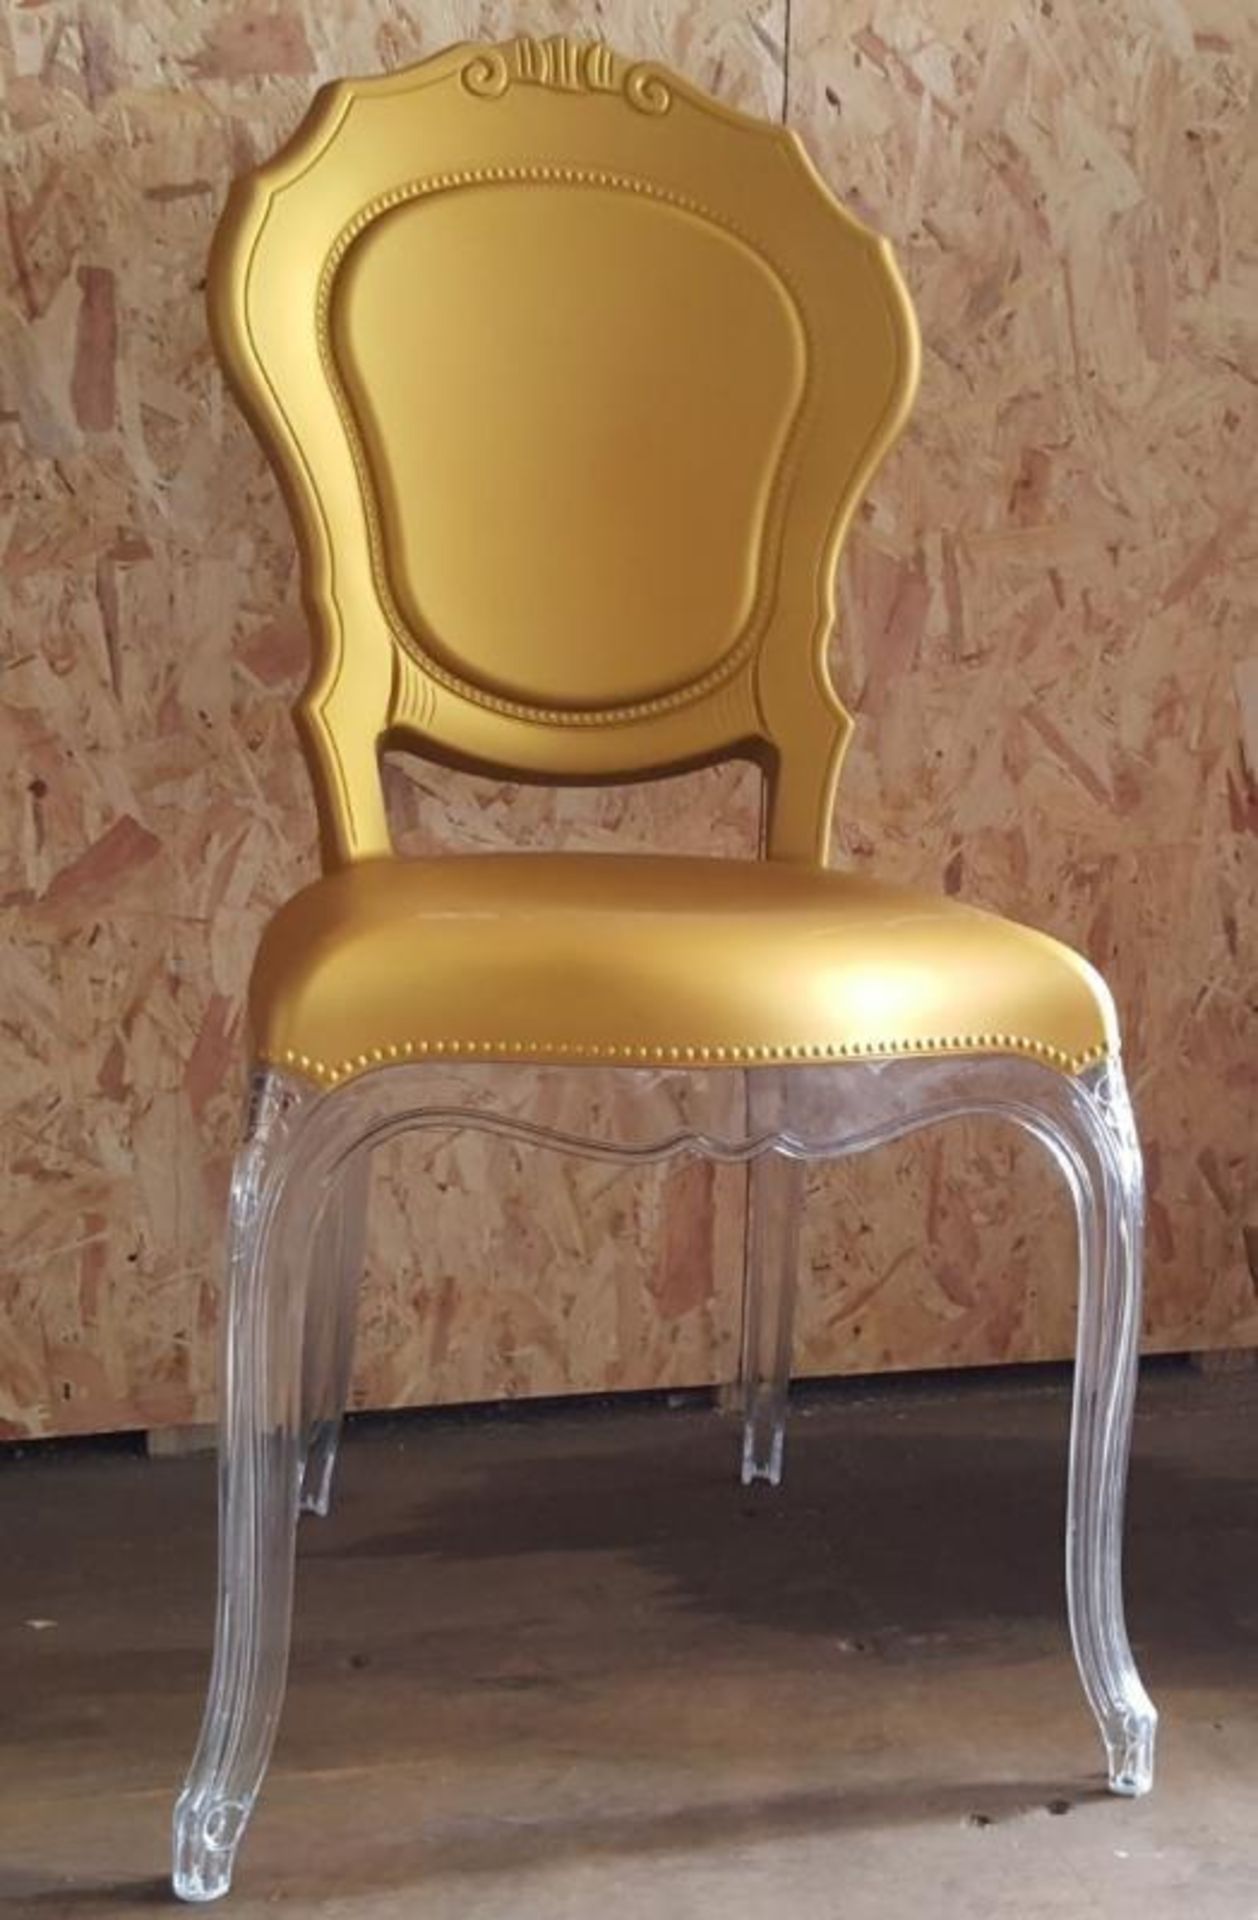 5 x Acrylic Baroque-style 'Belle Epoque' Chairs Featuring A Clear Polycarbonate Frame With An Attrac - Image 2 of 5